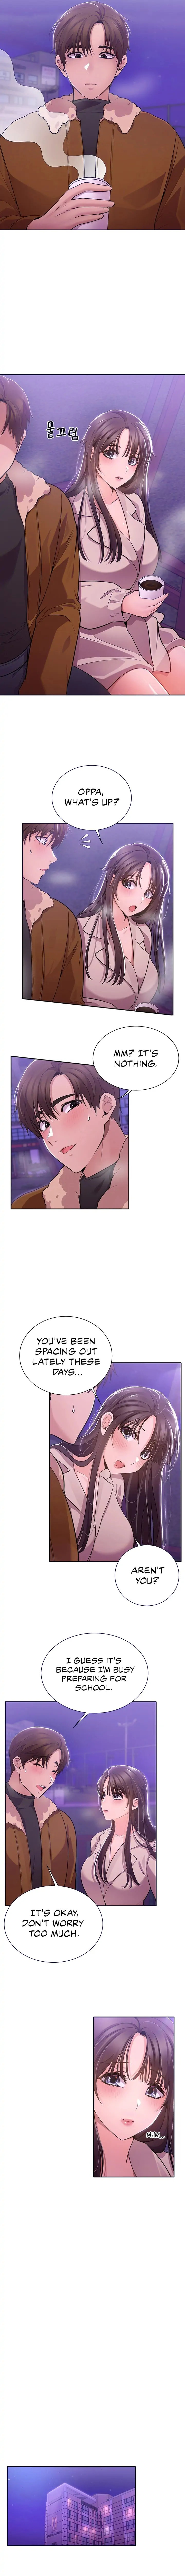 Meeting you again - Chapter 9 Page 2